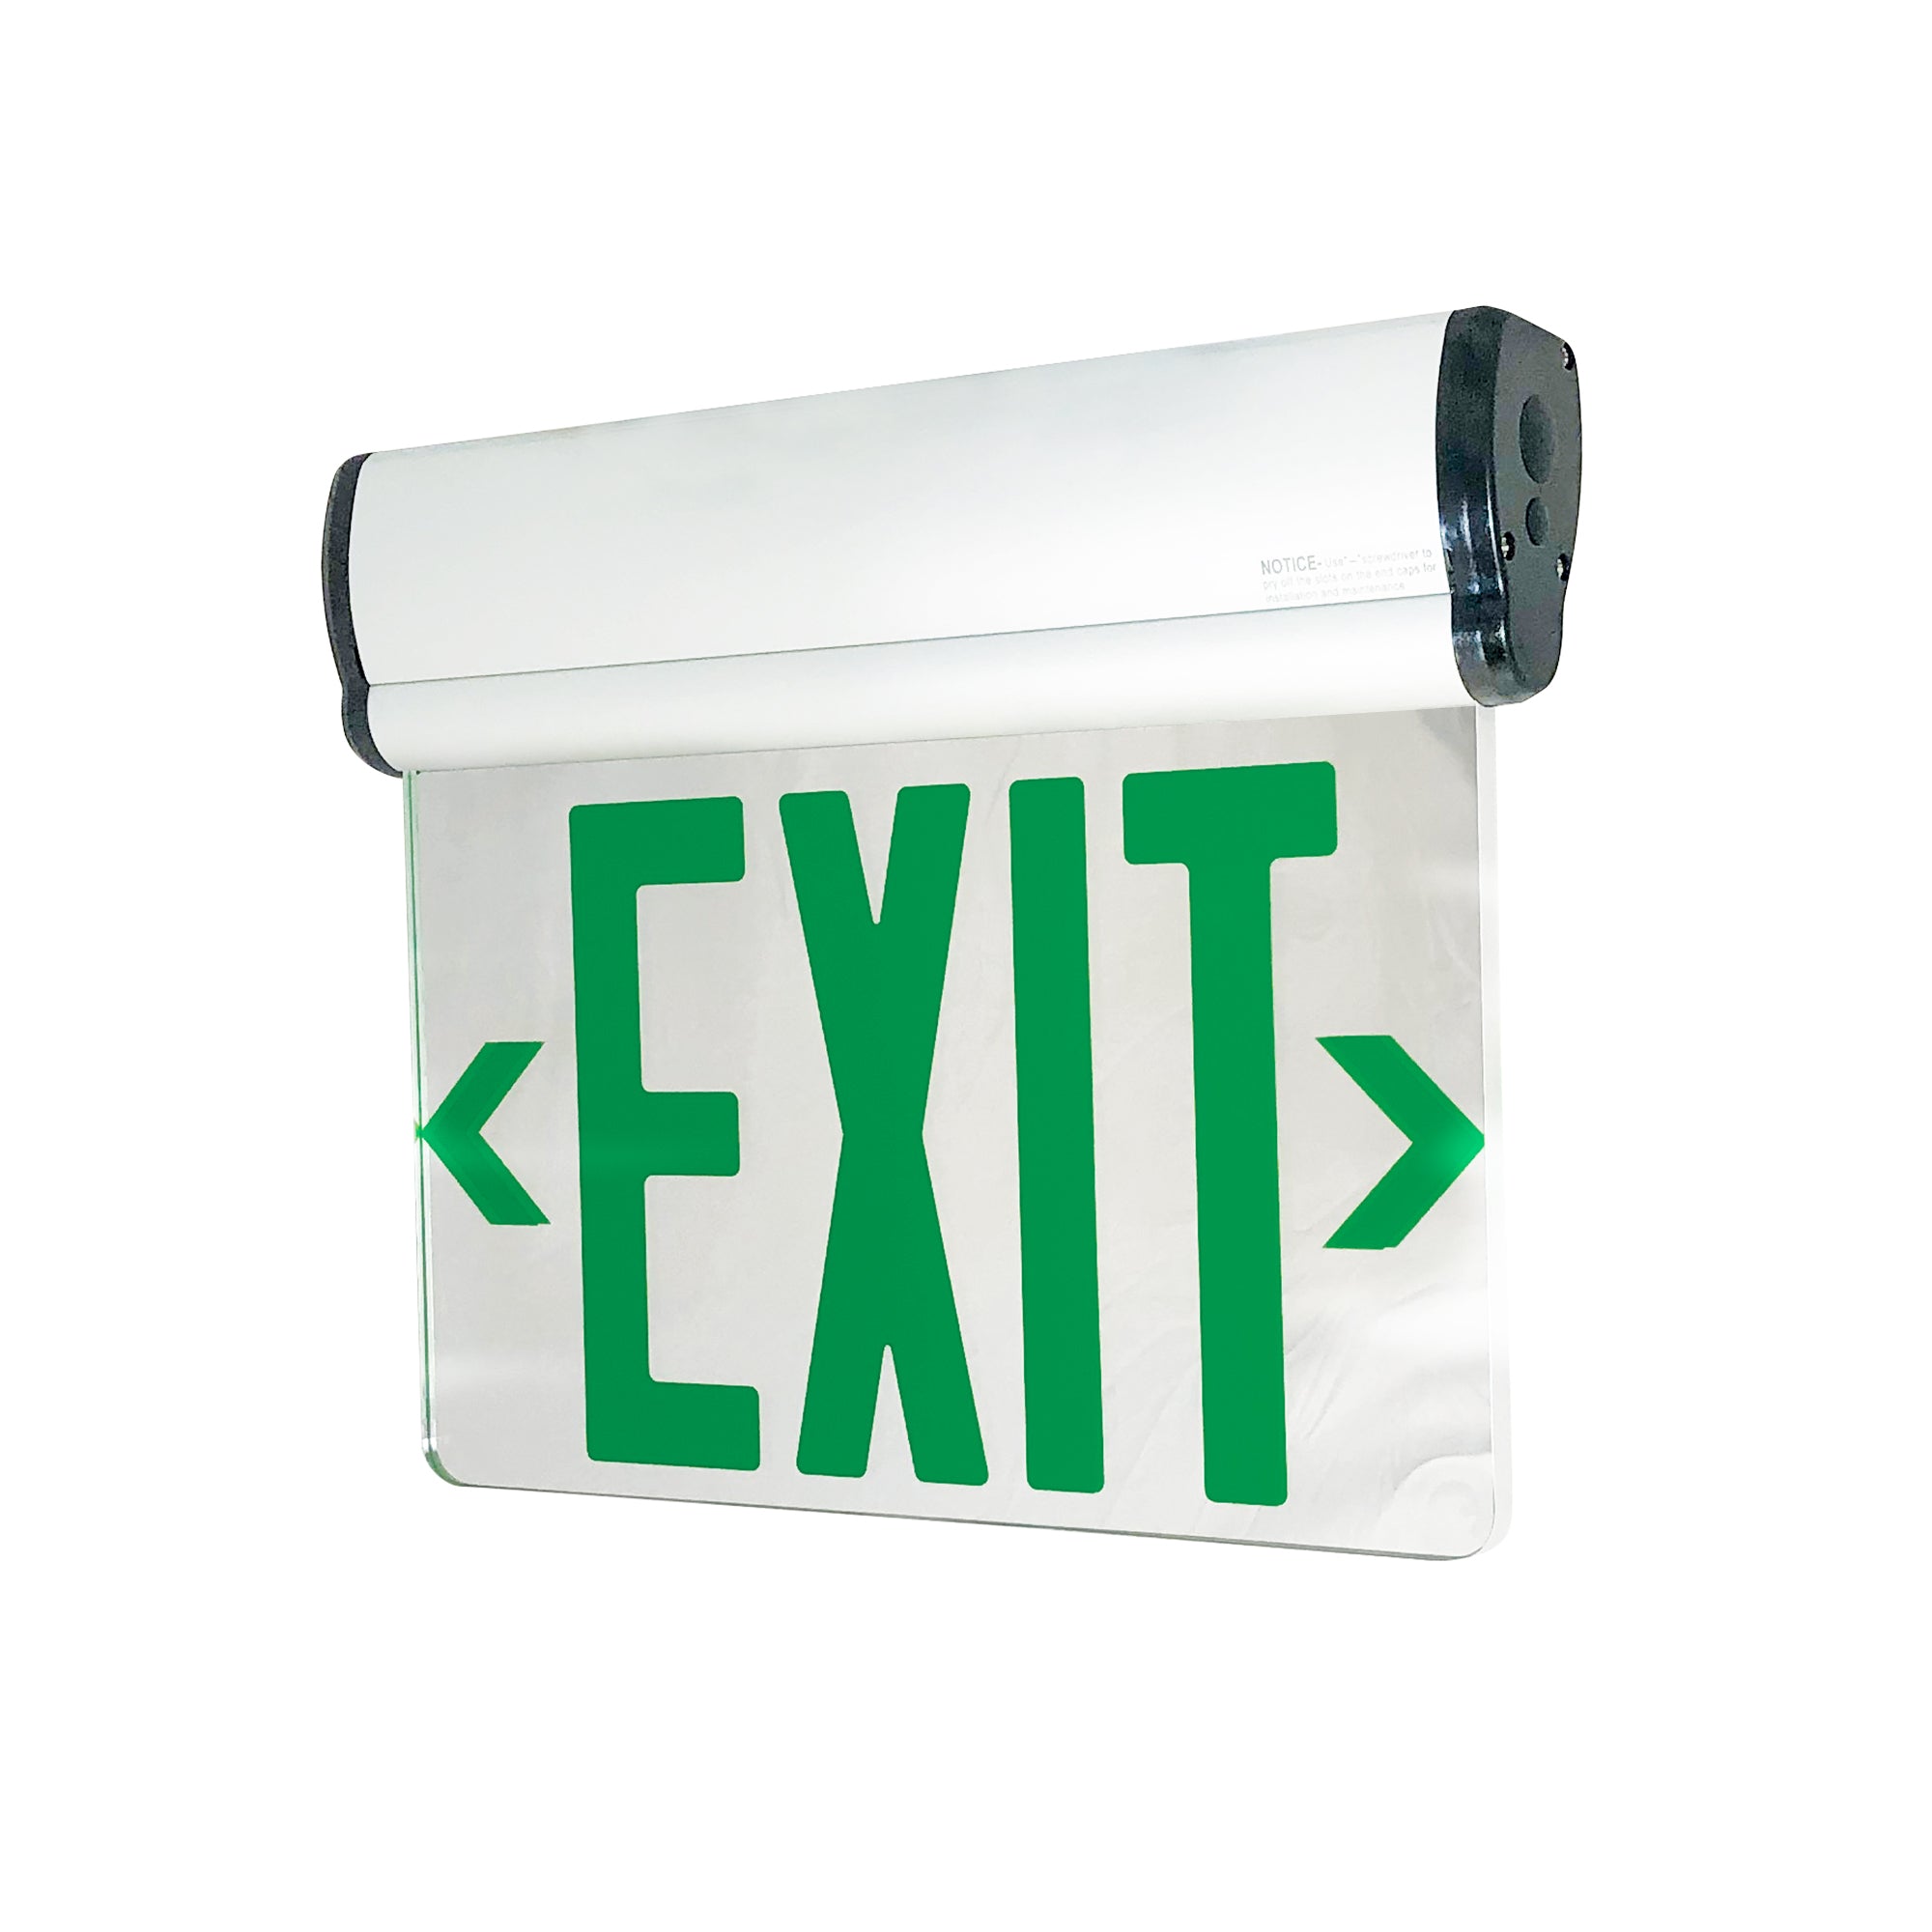 Nora Lighting NX-810-LEDG2MW - Exit / Emergency - Surface Adjustable LED Edge-Lit Exit Sign, AC Only, 6 Inch Green Letters, Double Face / Mirrored Acrylic, White Housing